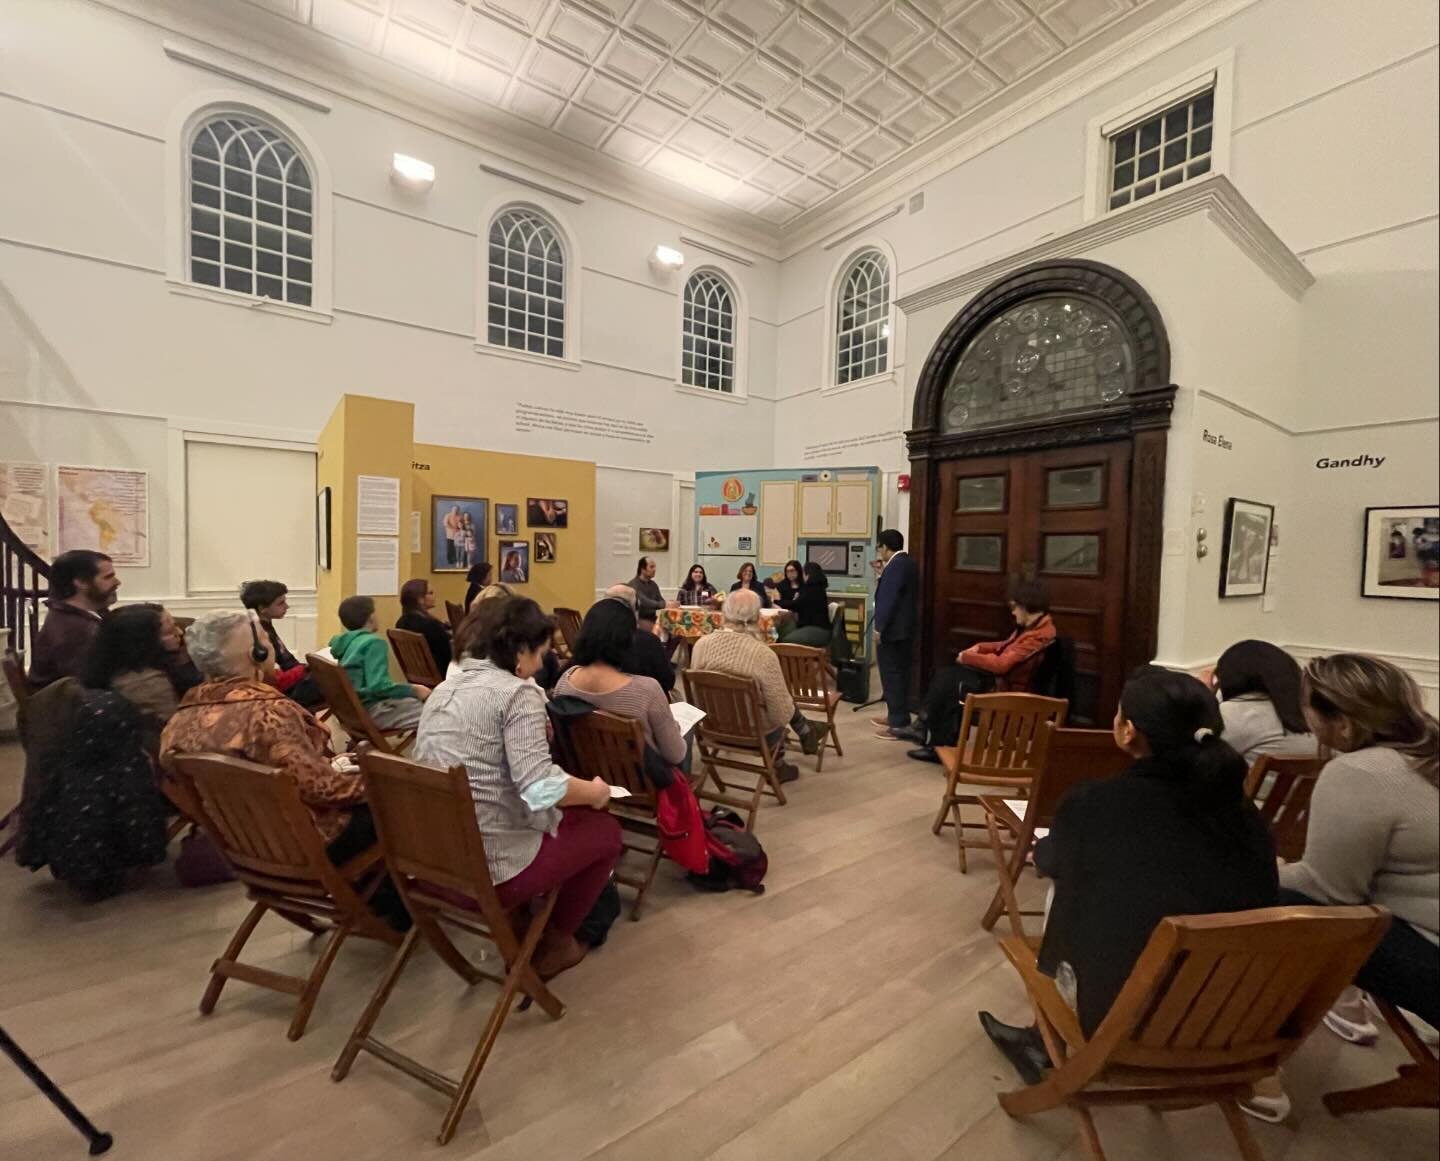 Thank you to our community for holding space for a very important conversation about mental health in the Latino Community.

Visit the Museo Inmigrante this week. We are open today until 7 pm, Friday 2-5 pm, and Saturday, 12-5 pm.

#somerville #histo